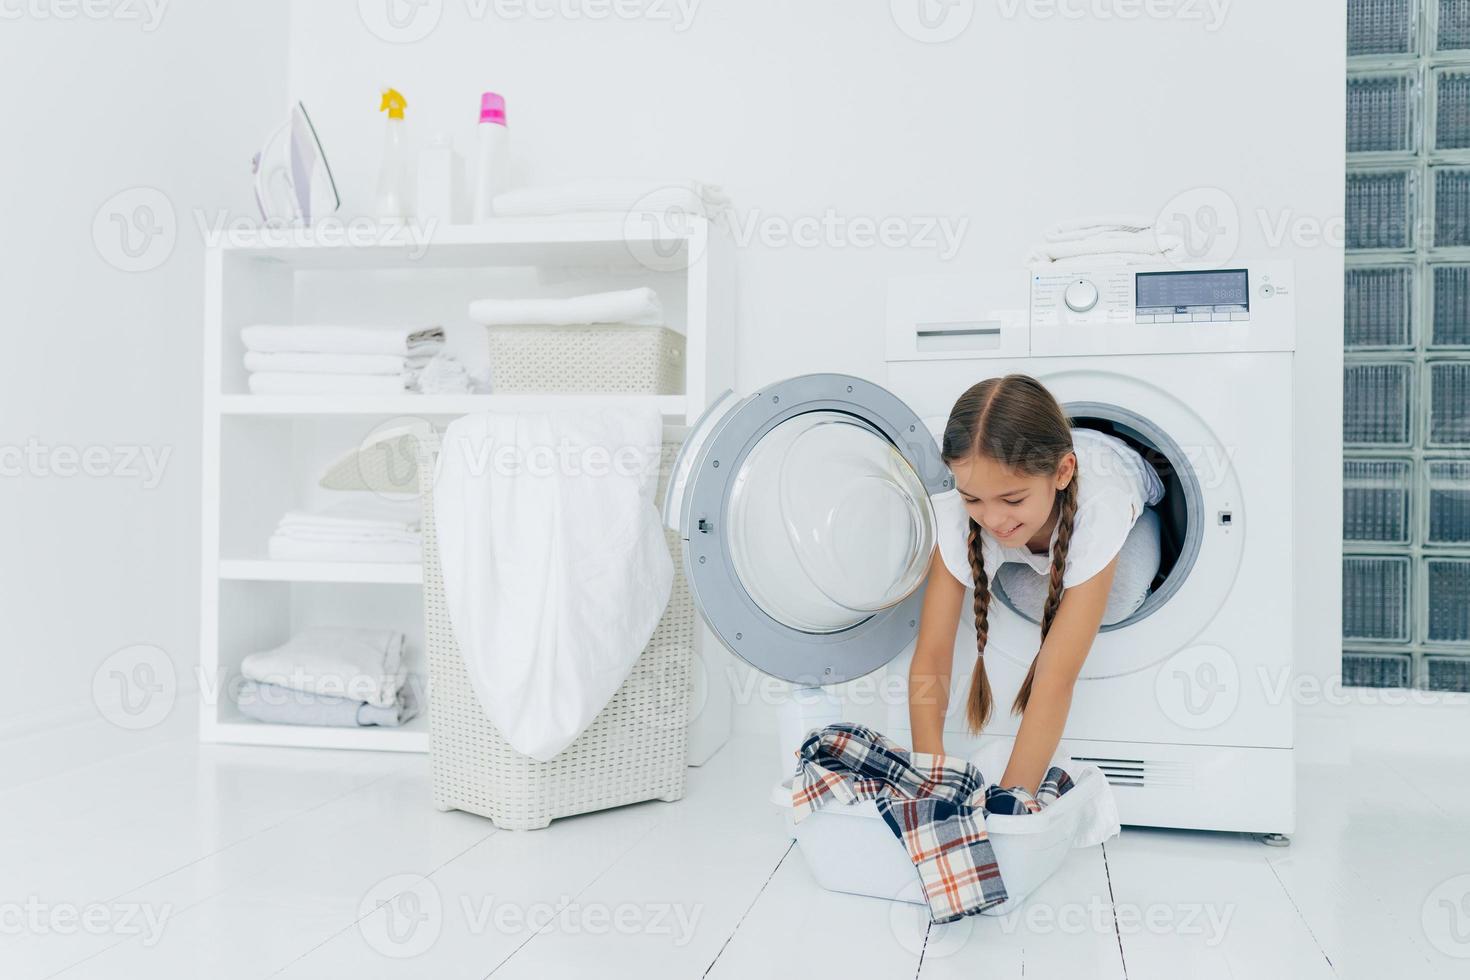 Pretty little girl householder poses inside of washing machine, takes checkered shirt from basin, engaged in laundry, has glad expression, two combed plaits. Childhood and washing day concept photo